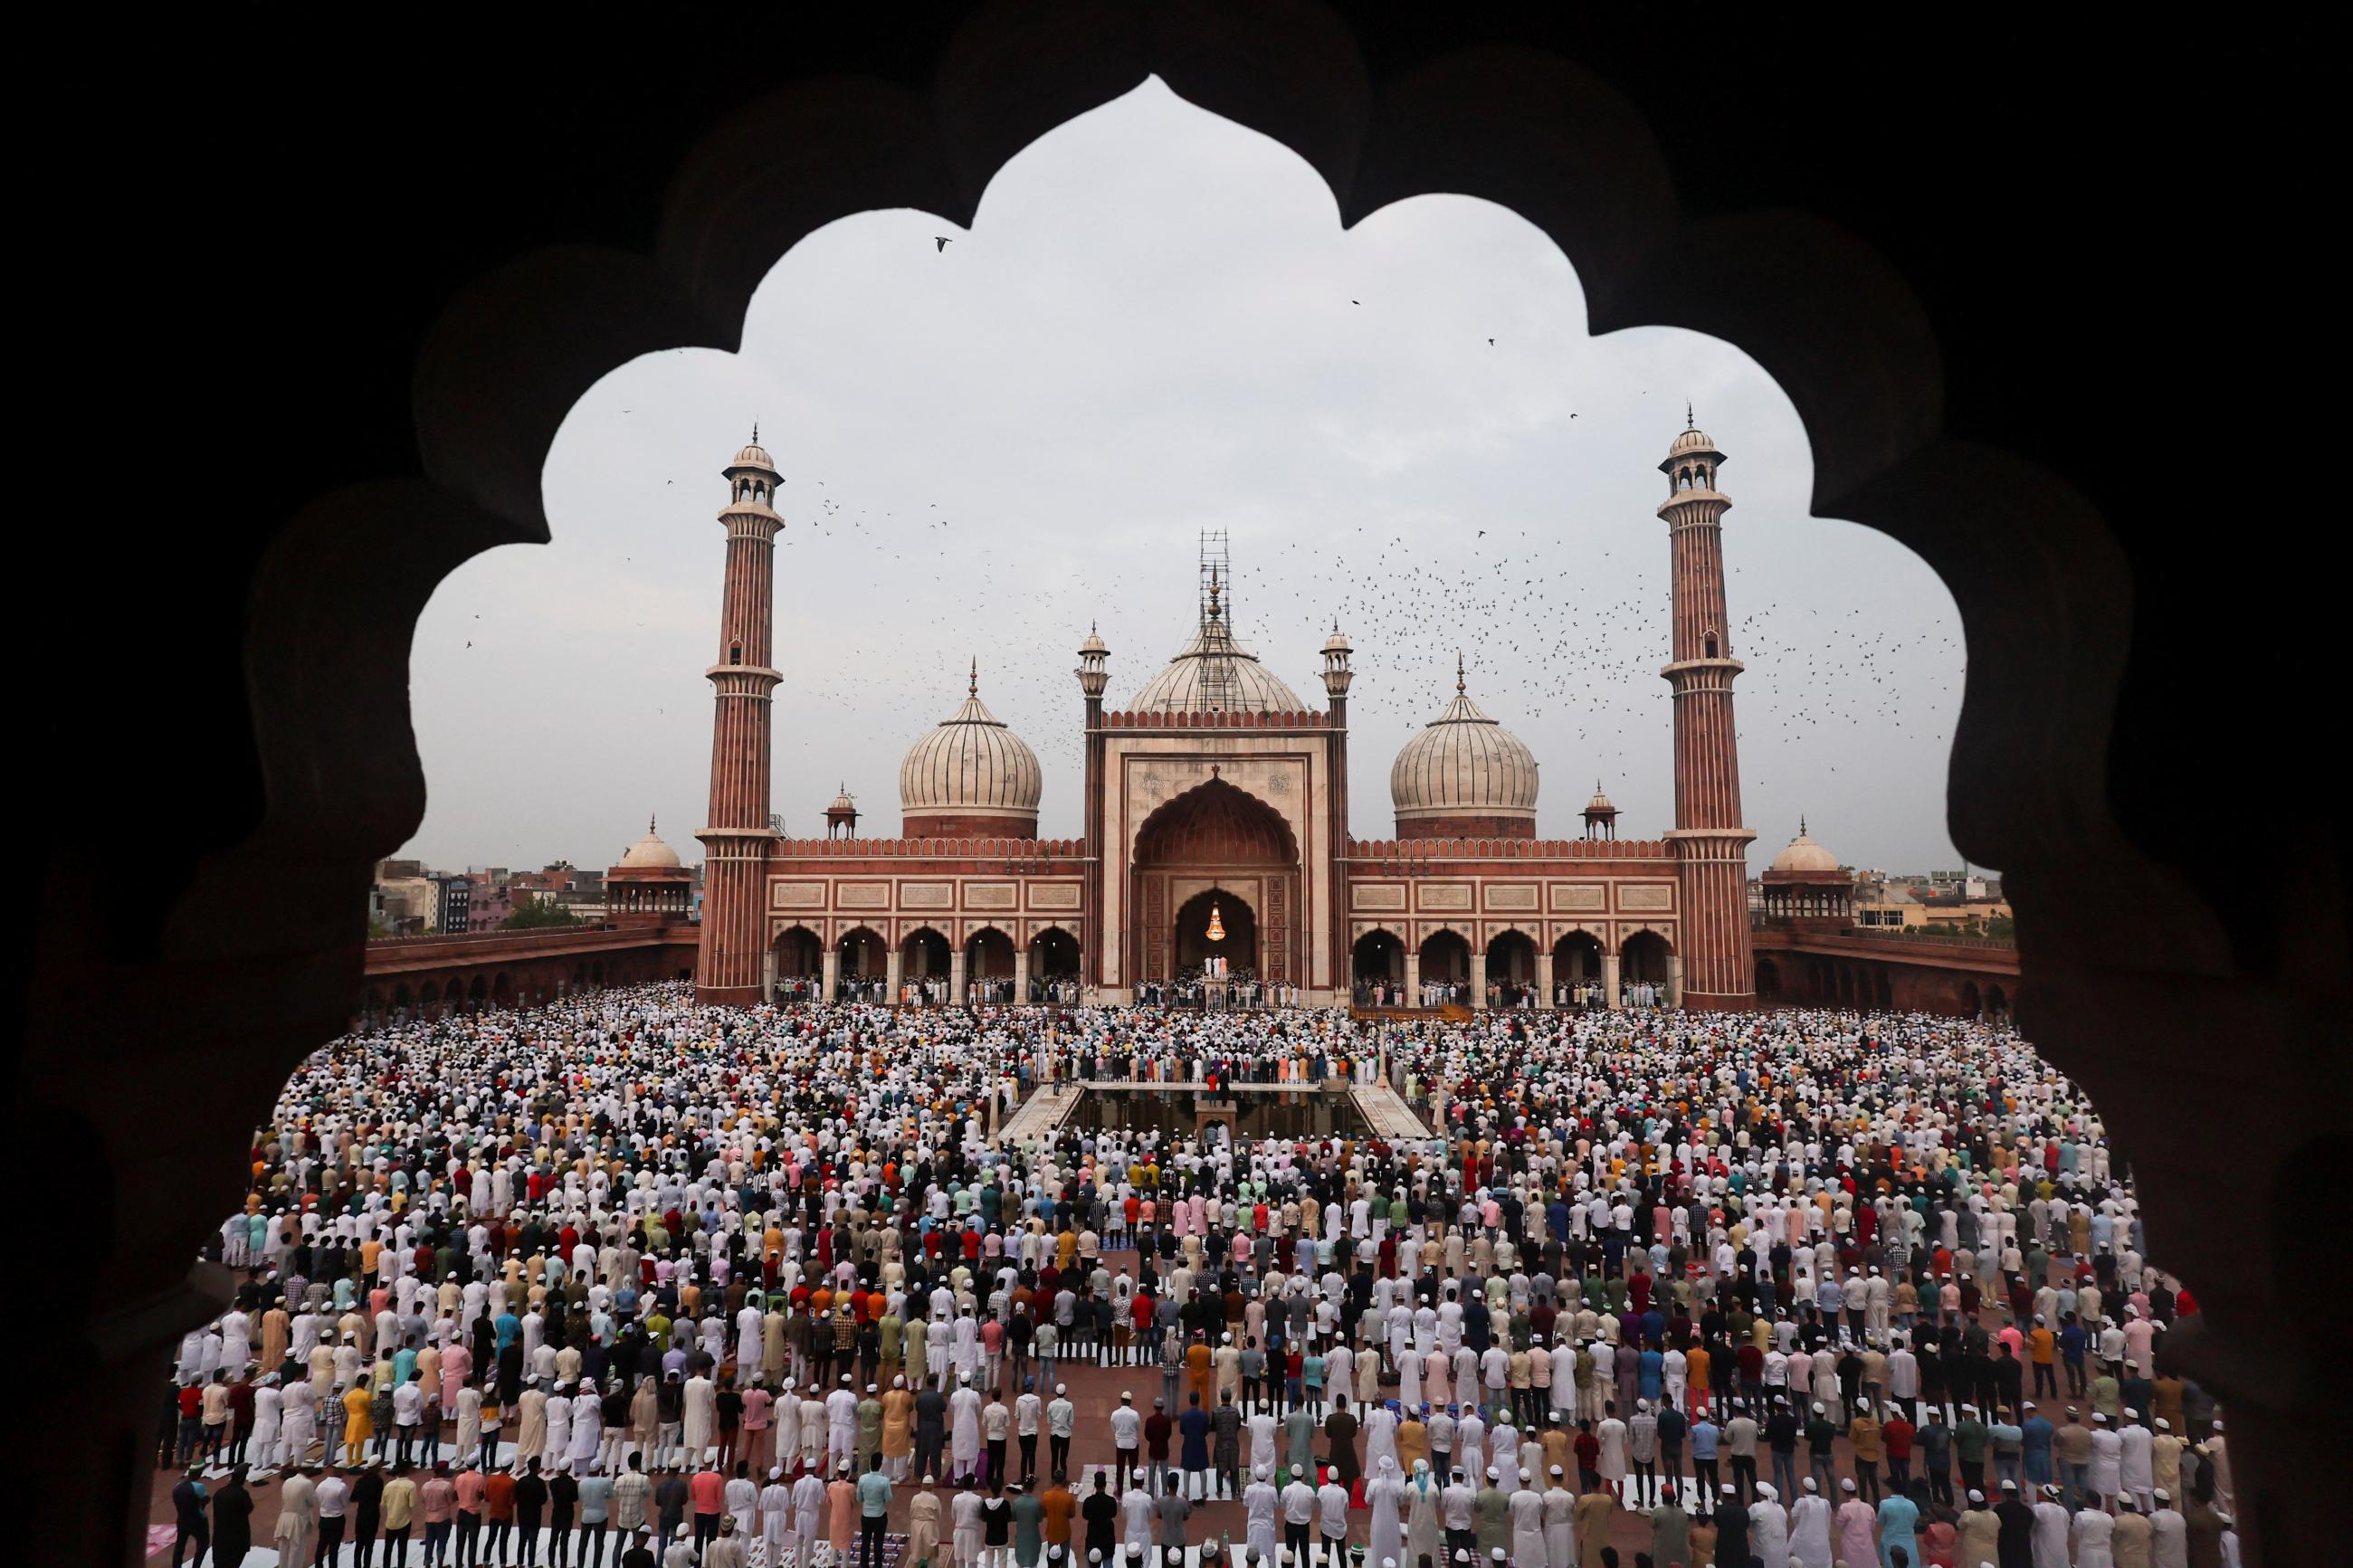 Muslims offer prayers at Jama Masjid on the occasion of Eid al-Adha festival, in the old quarters of Delhi, India, July 10, 2022. 